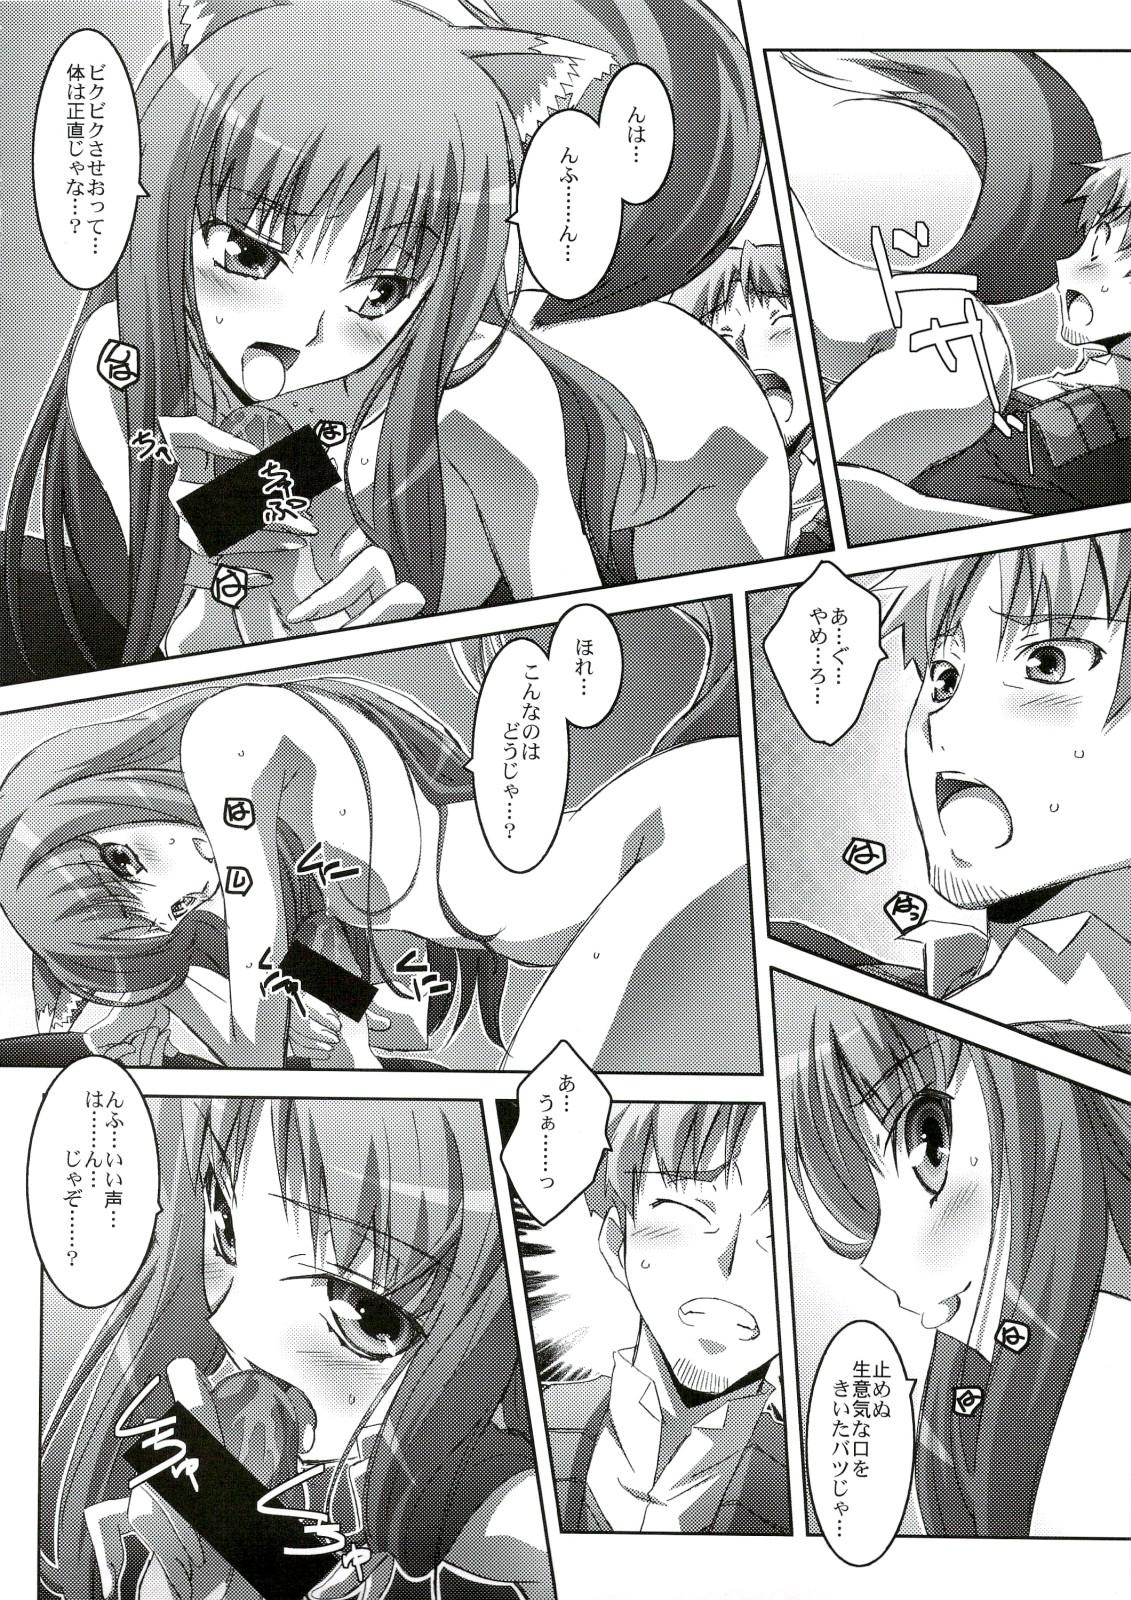 Cock Horon Hororon - Spice and wolf Culona - Page 13